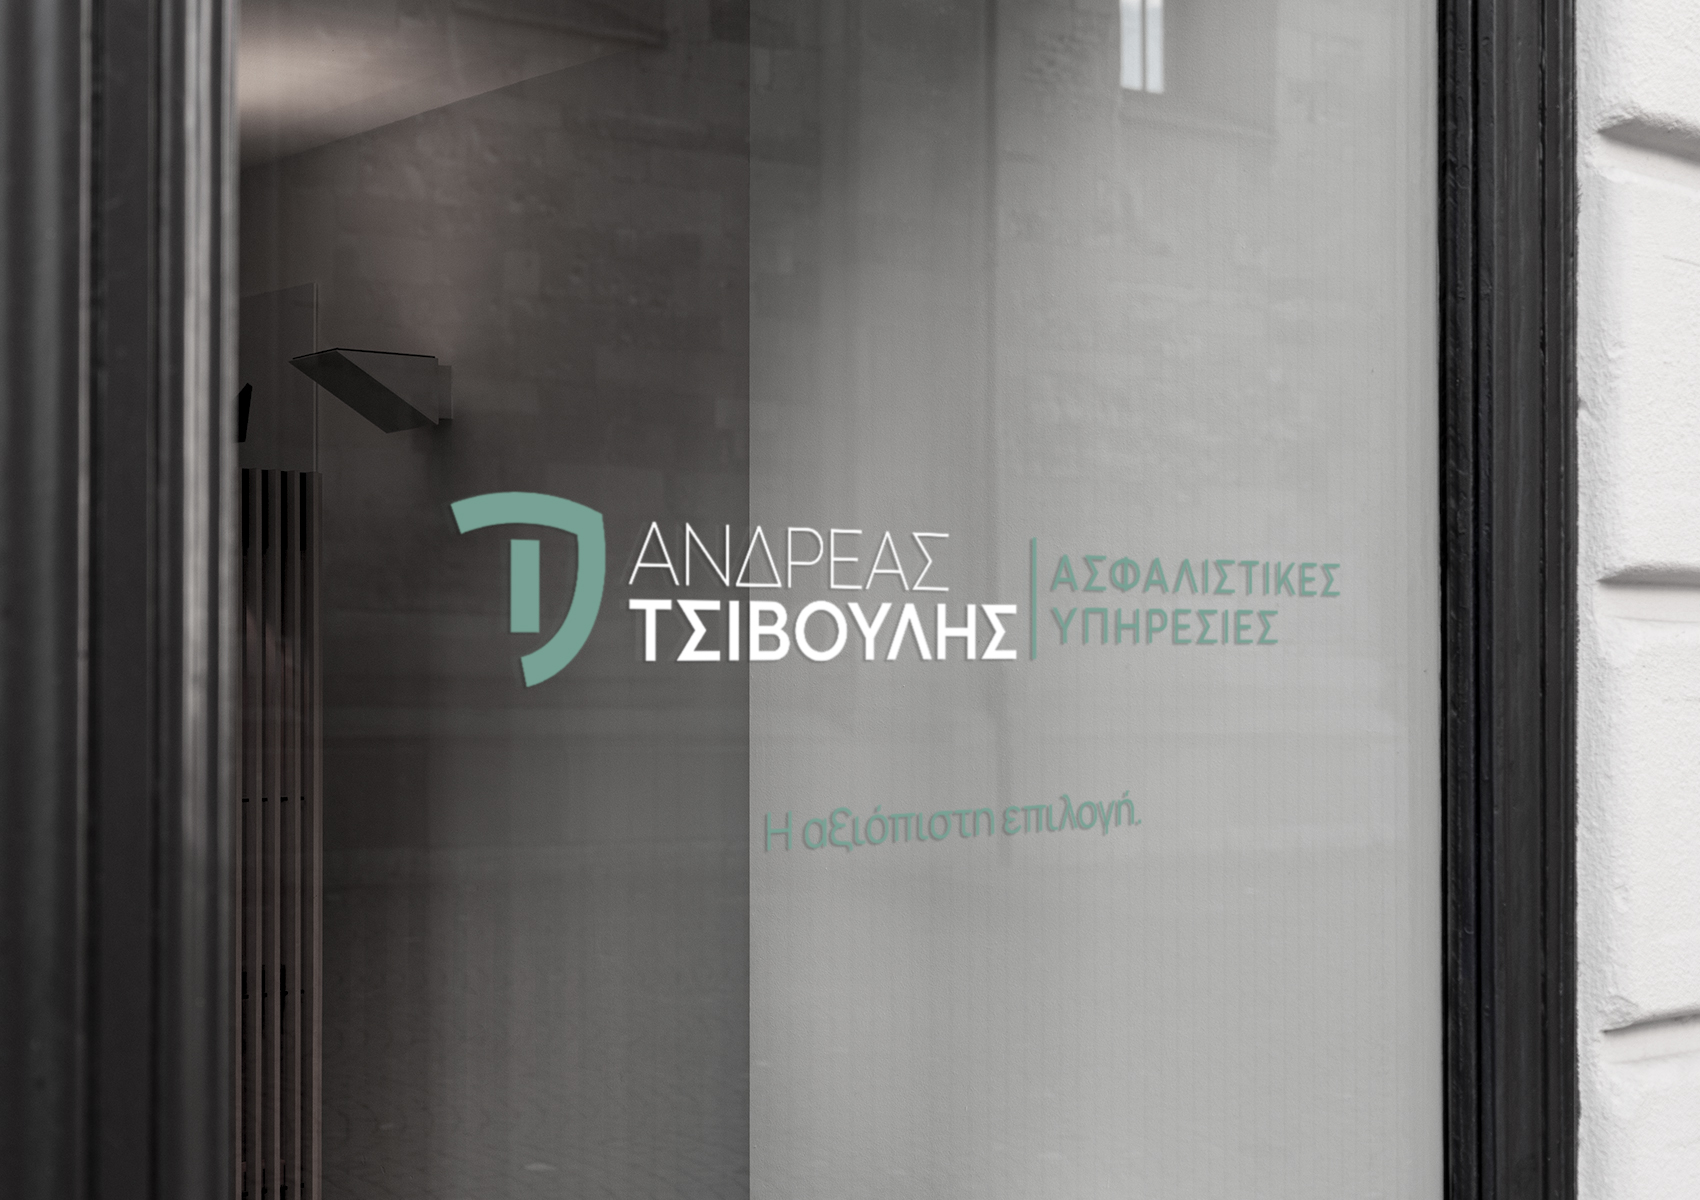 Andreas Tsivoulis window sign 1700x1200 by xhristakis